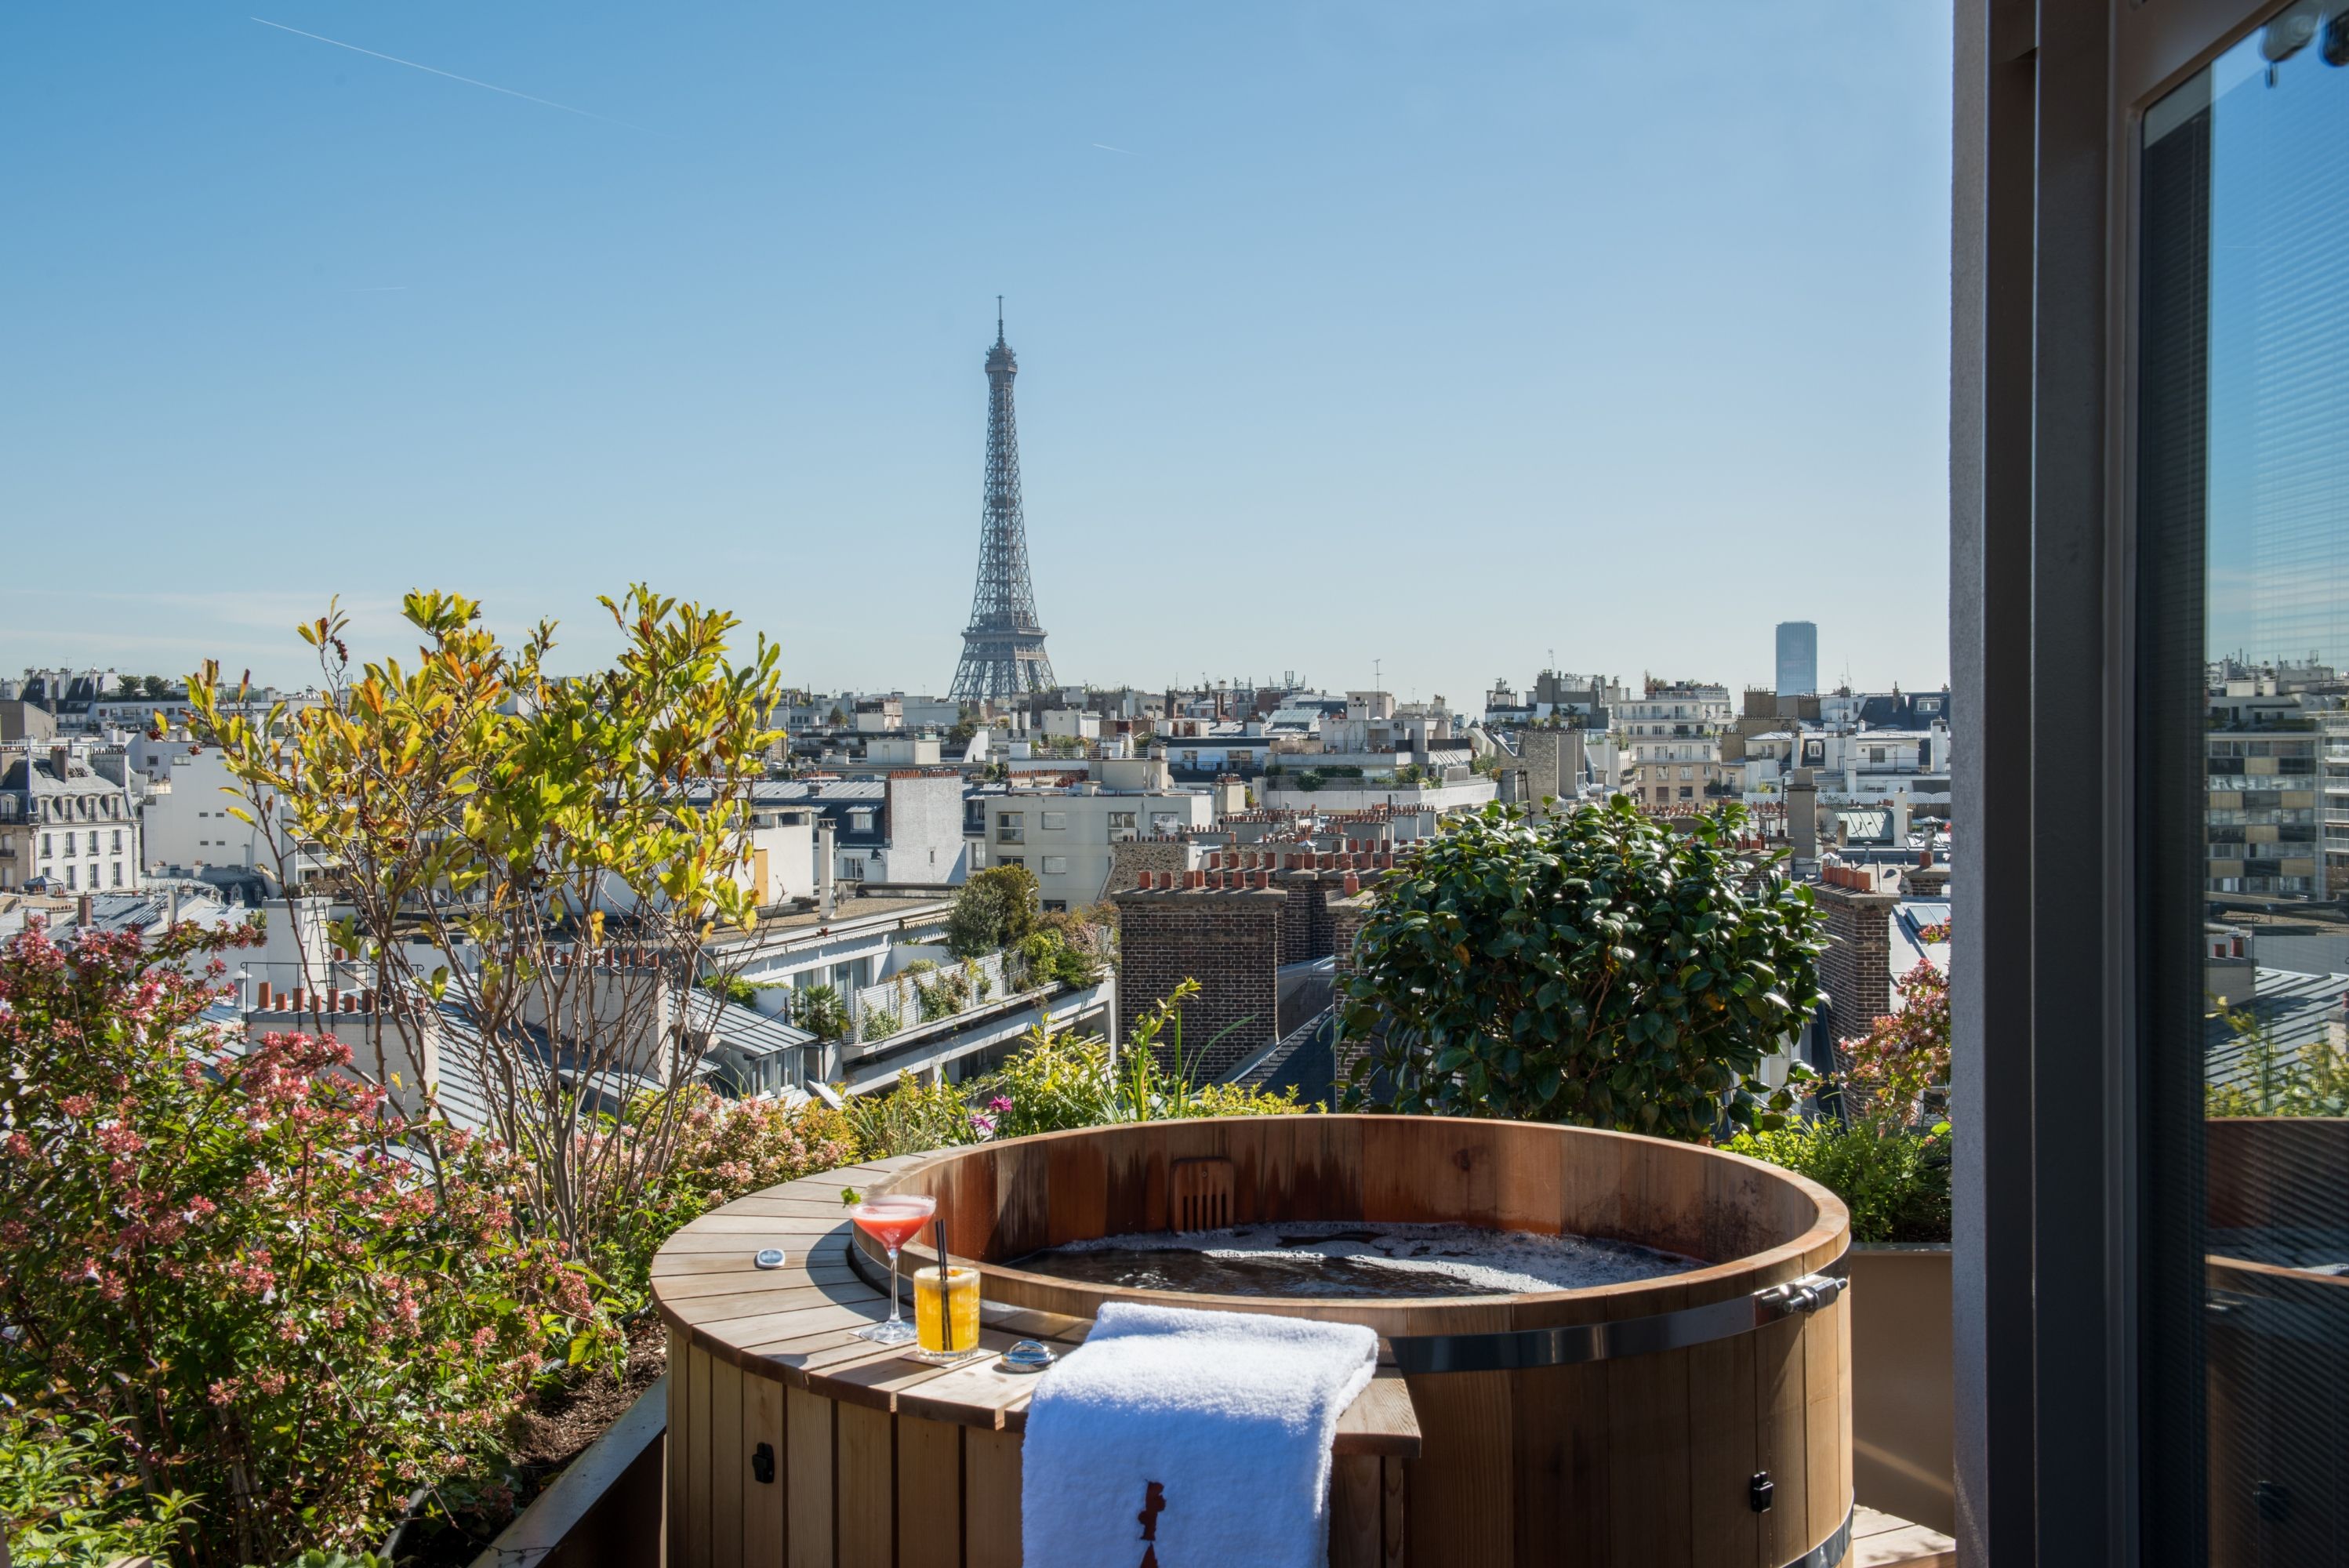 17 Instagrammable Paris Hotels with Eiffel Tower Views